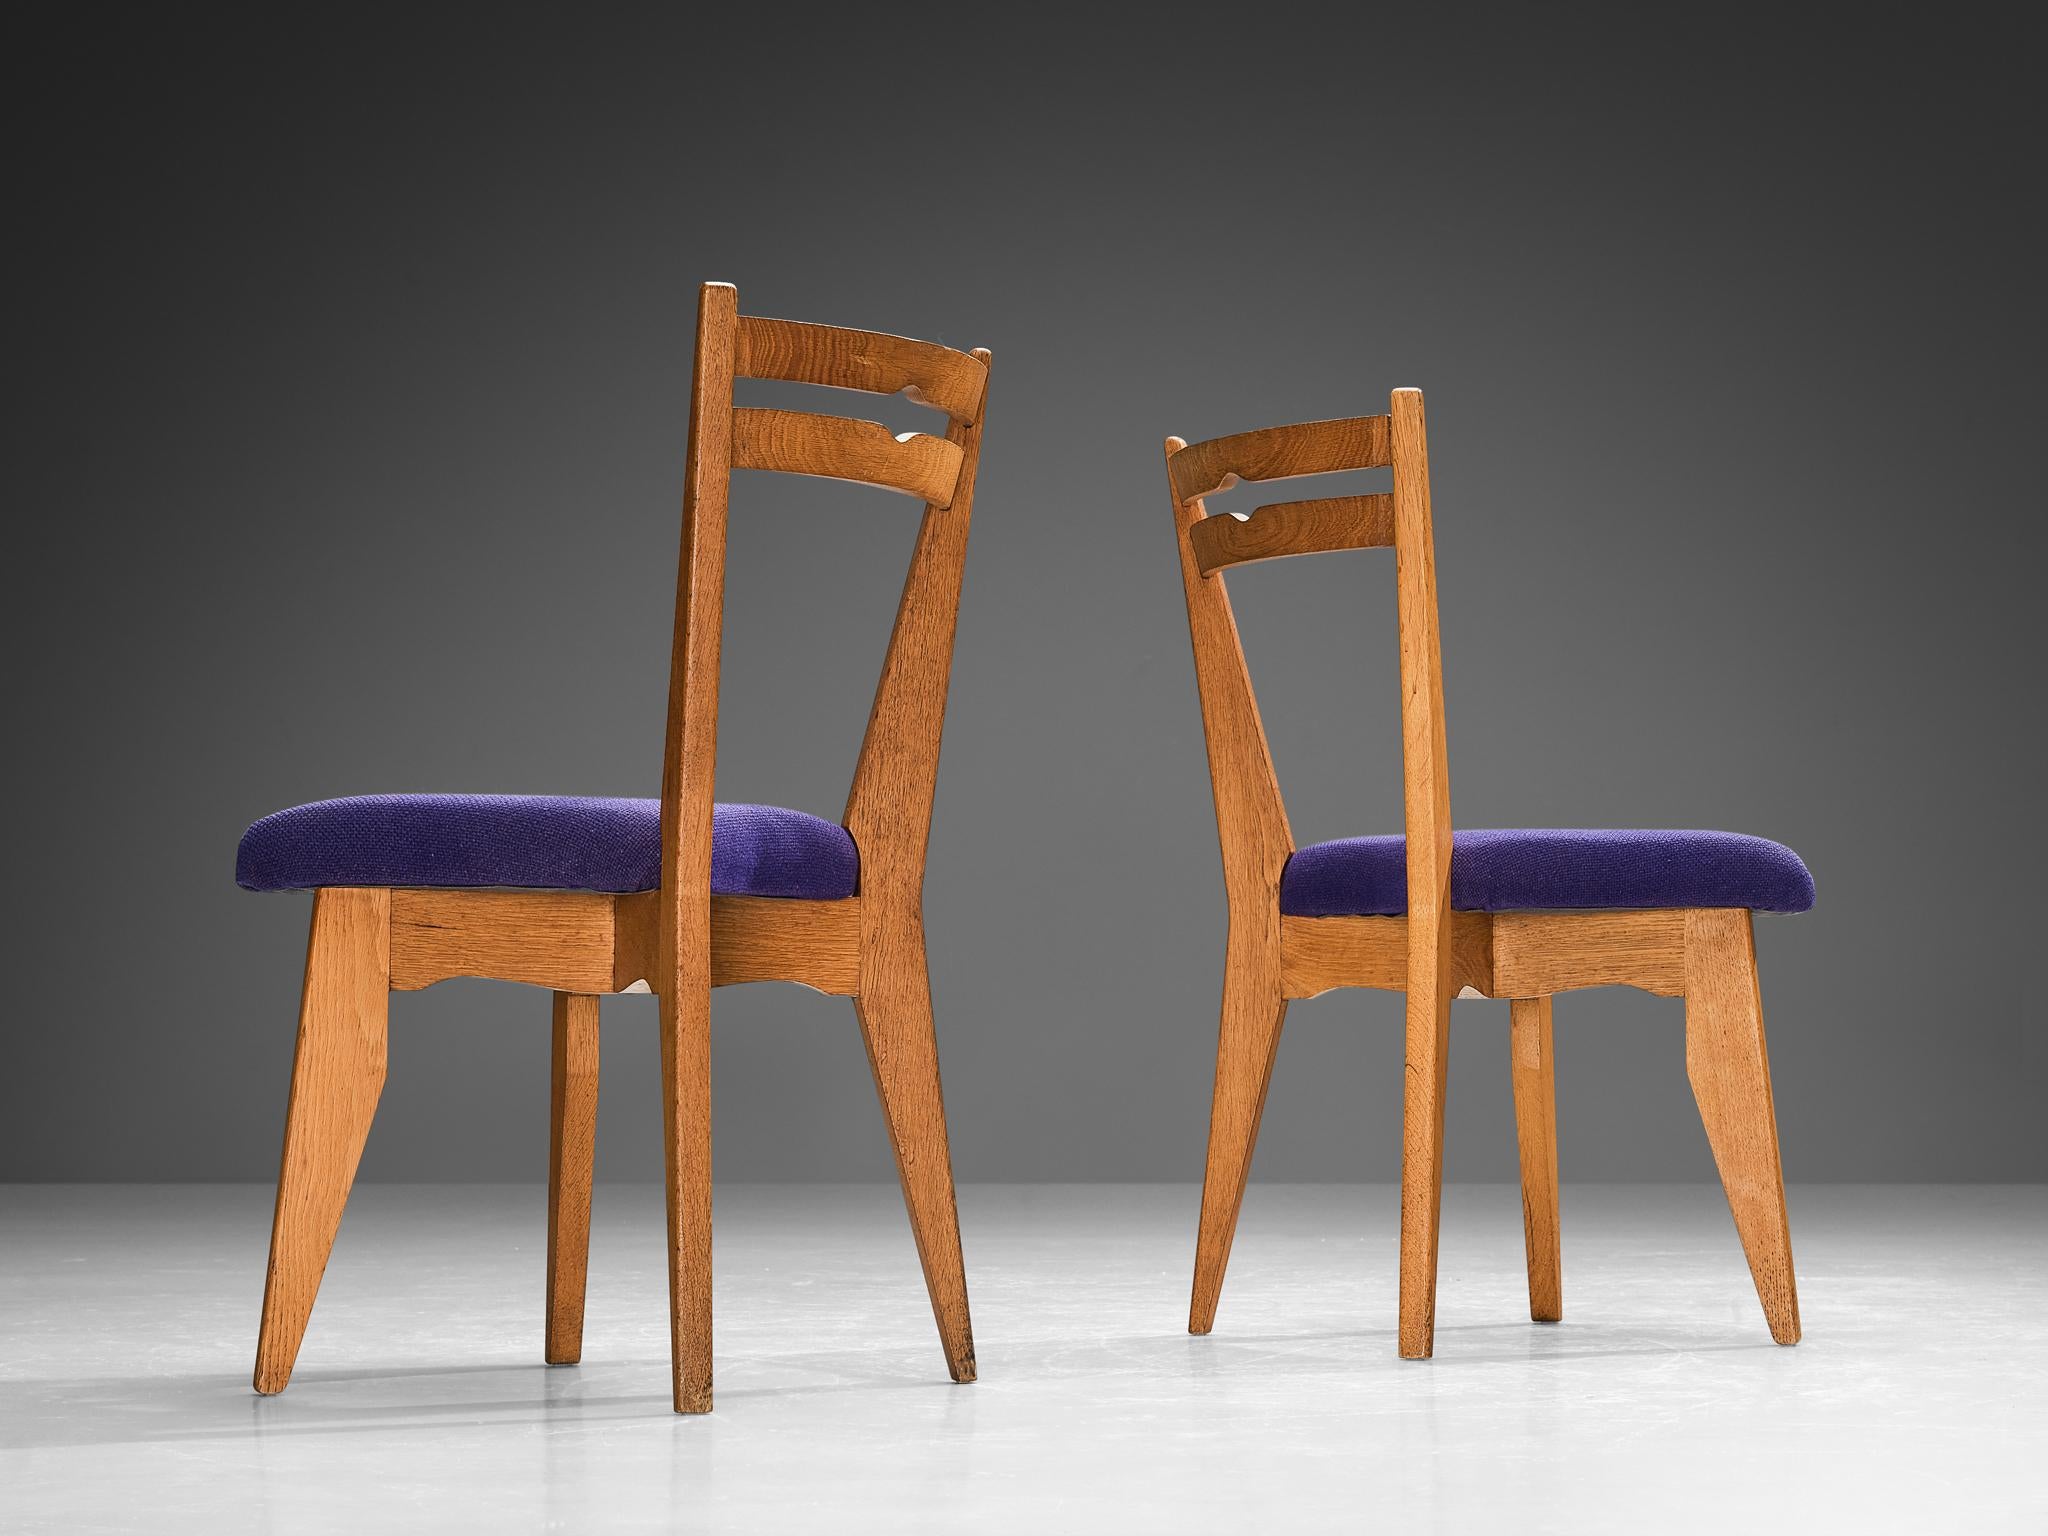 Guillerme & Chambron Pair of Dining Chairs in Oak